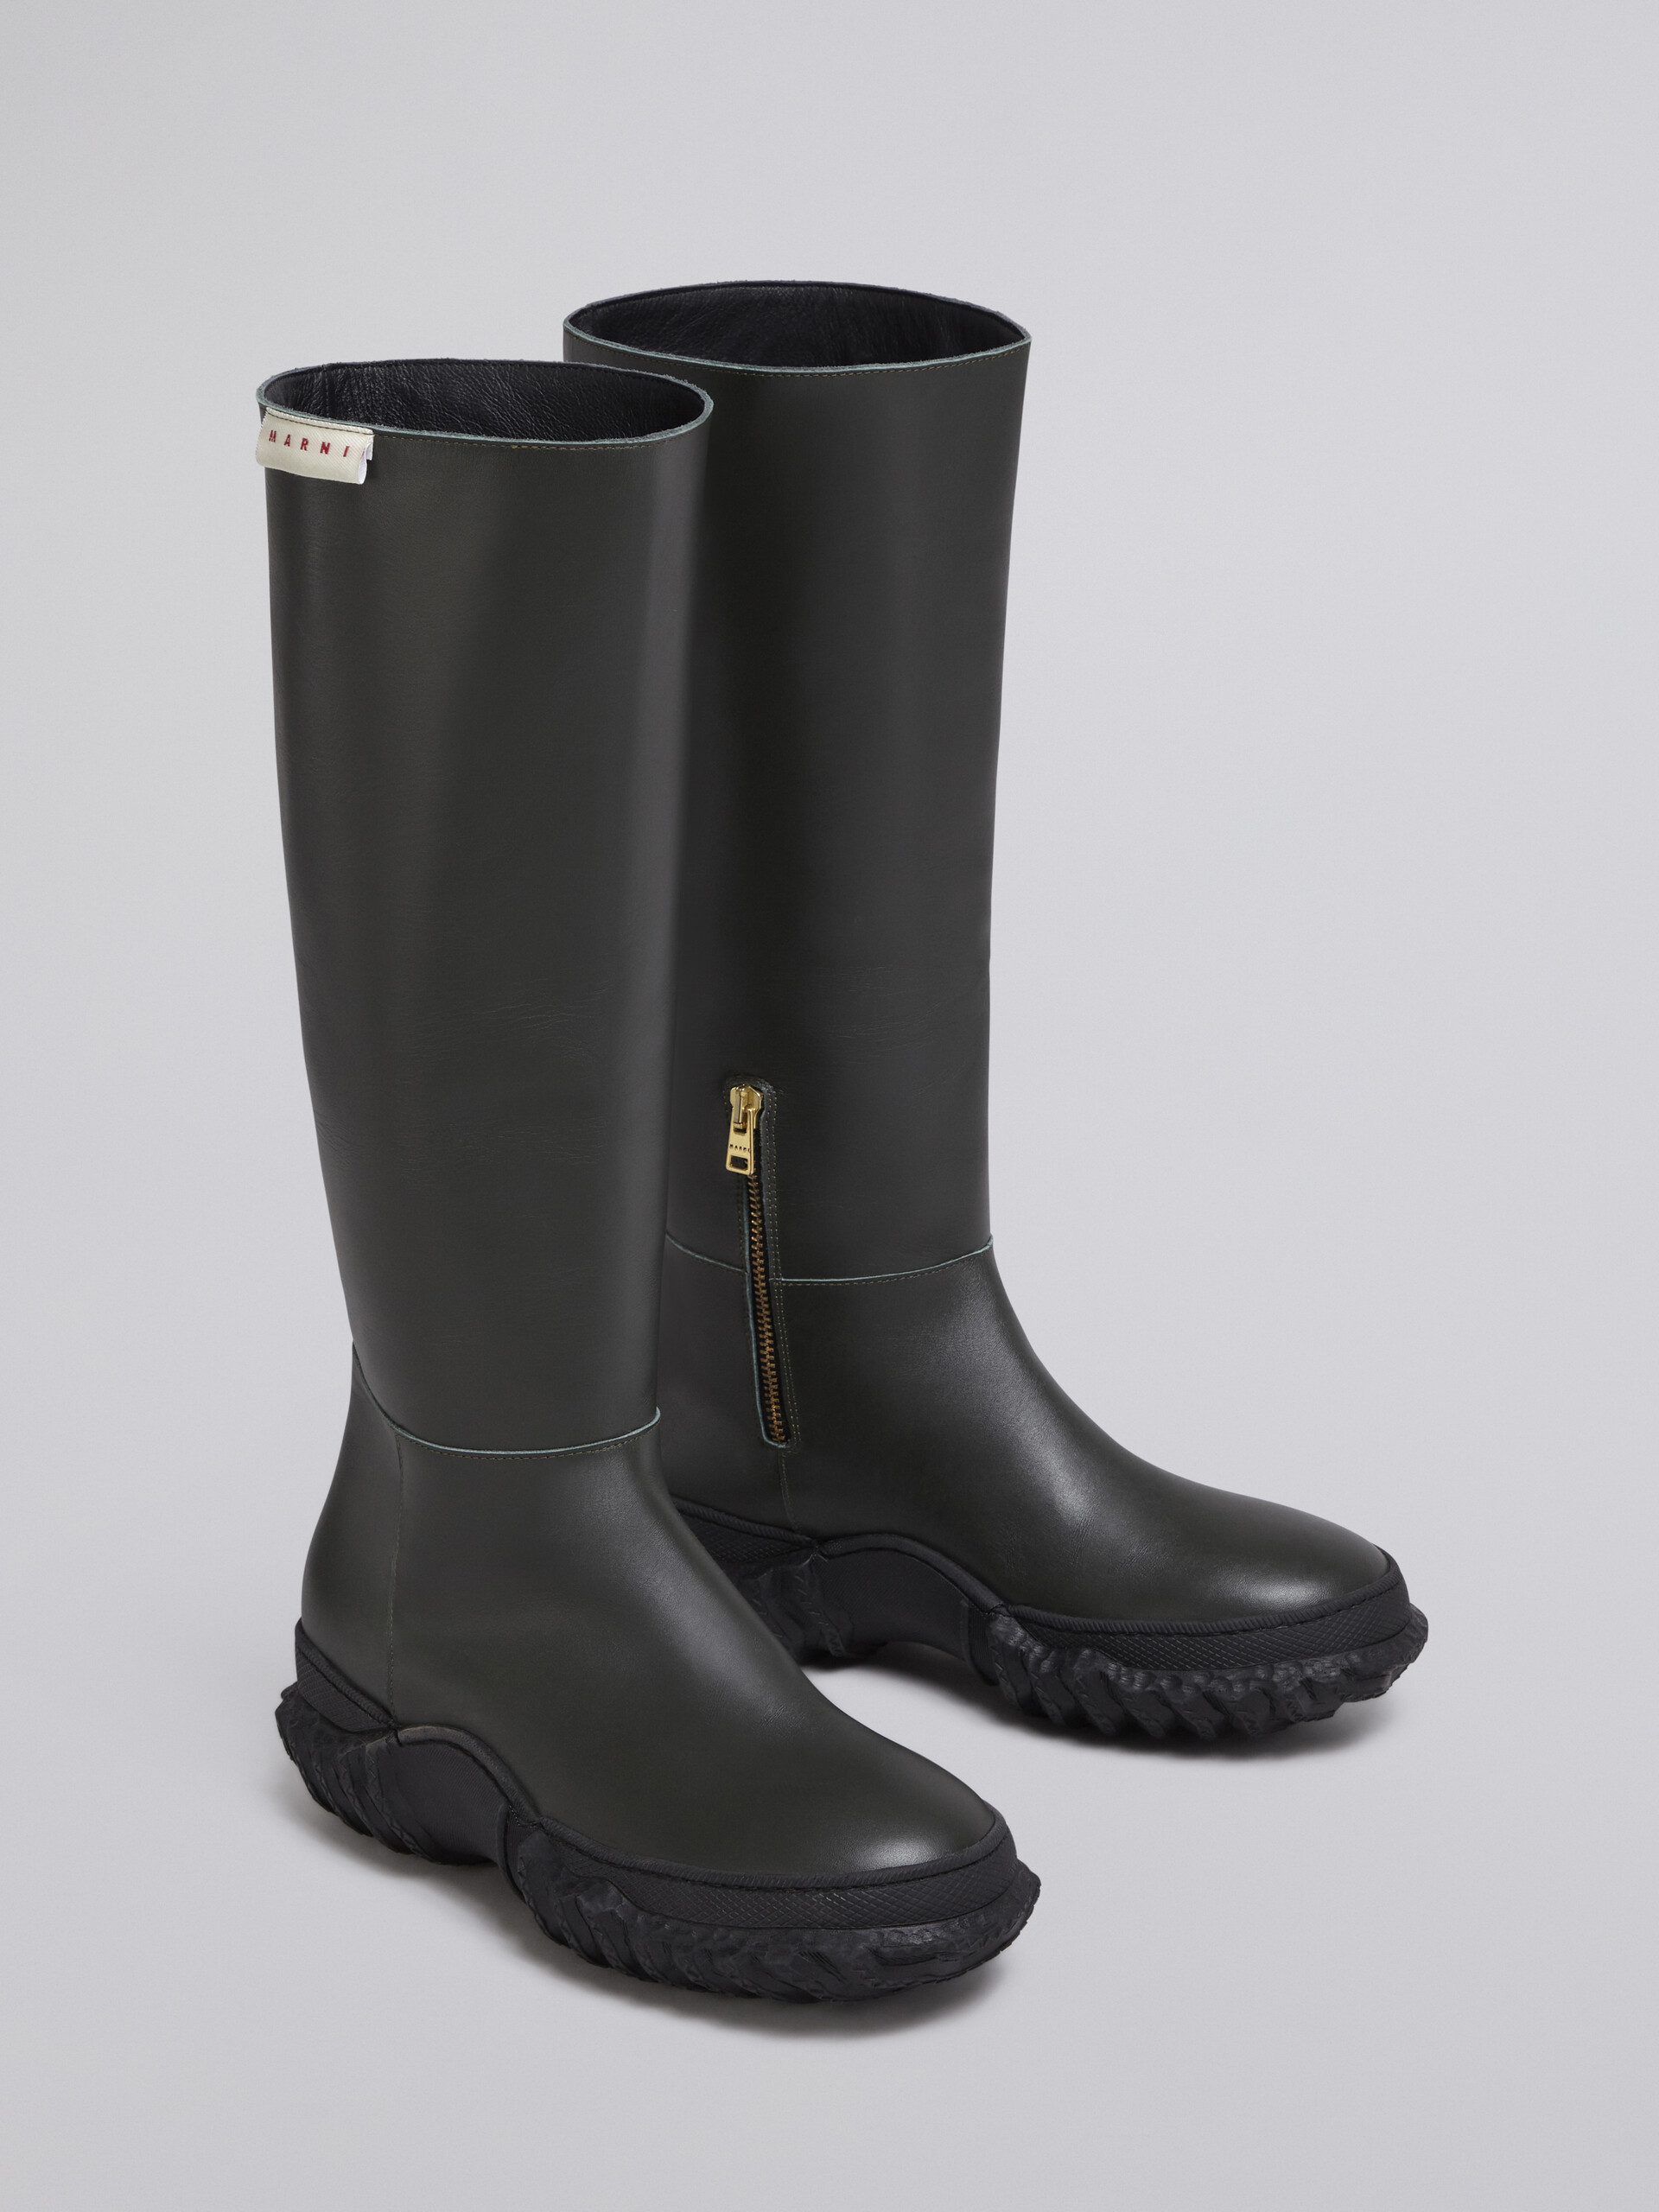 Smooth calfskin boot with wavy rubber sole - Boots - Image 4